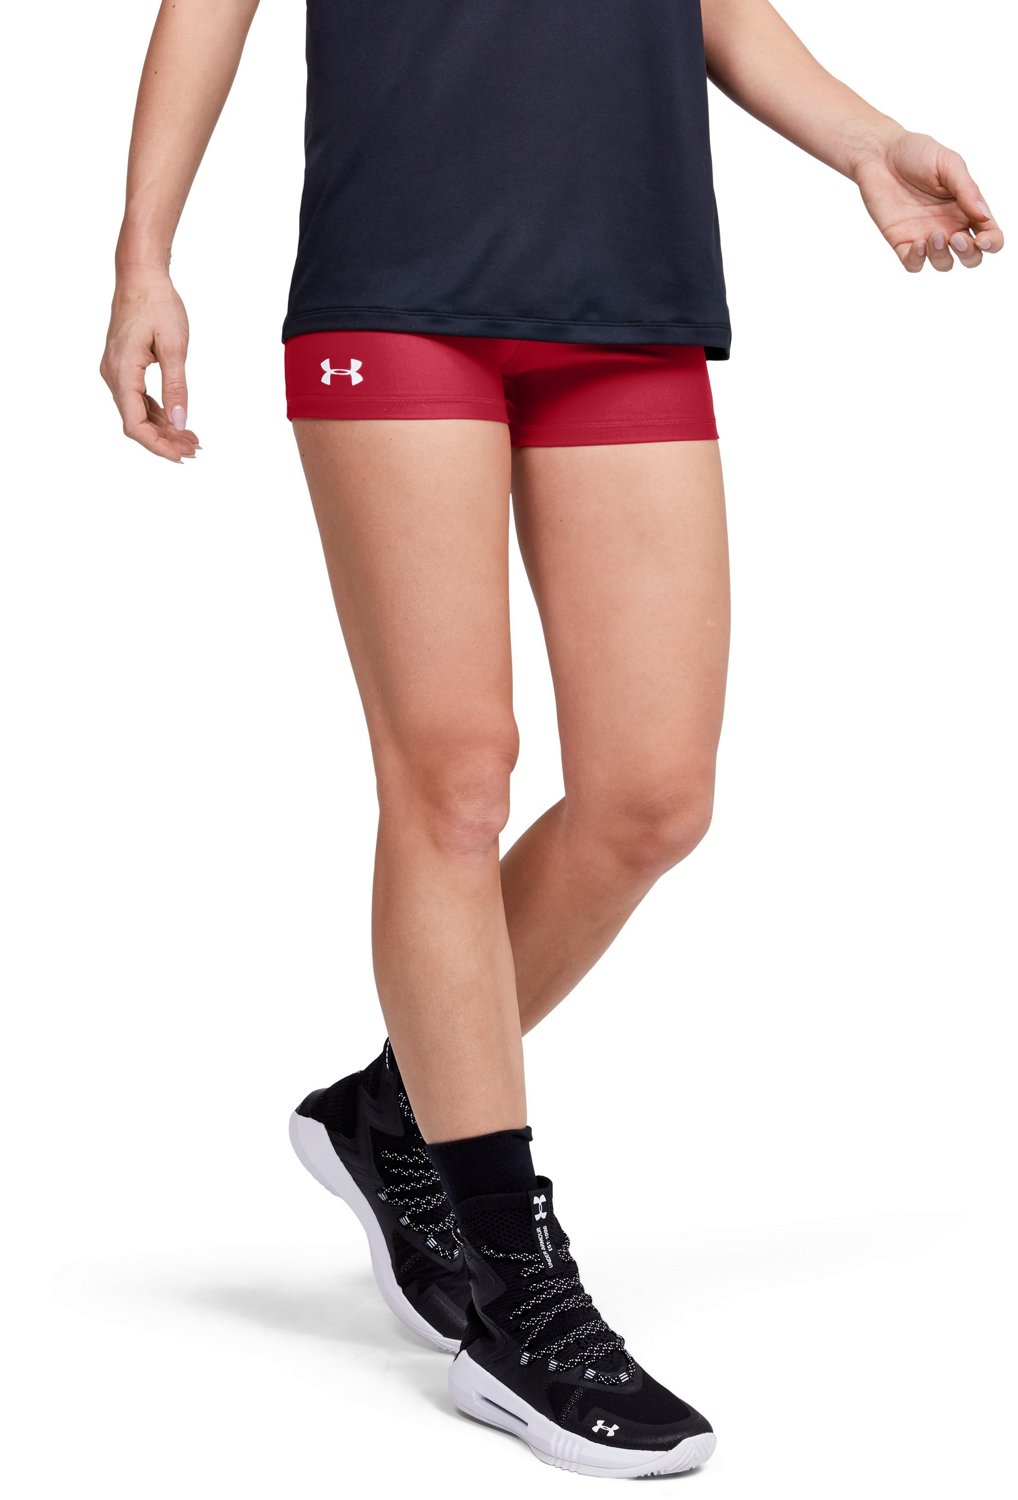 Girls Under Armour black fitted shorty shorts size YMD Volleyball Cheer  Athletic